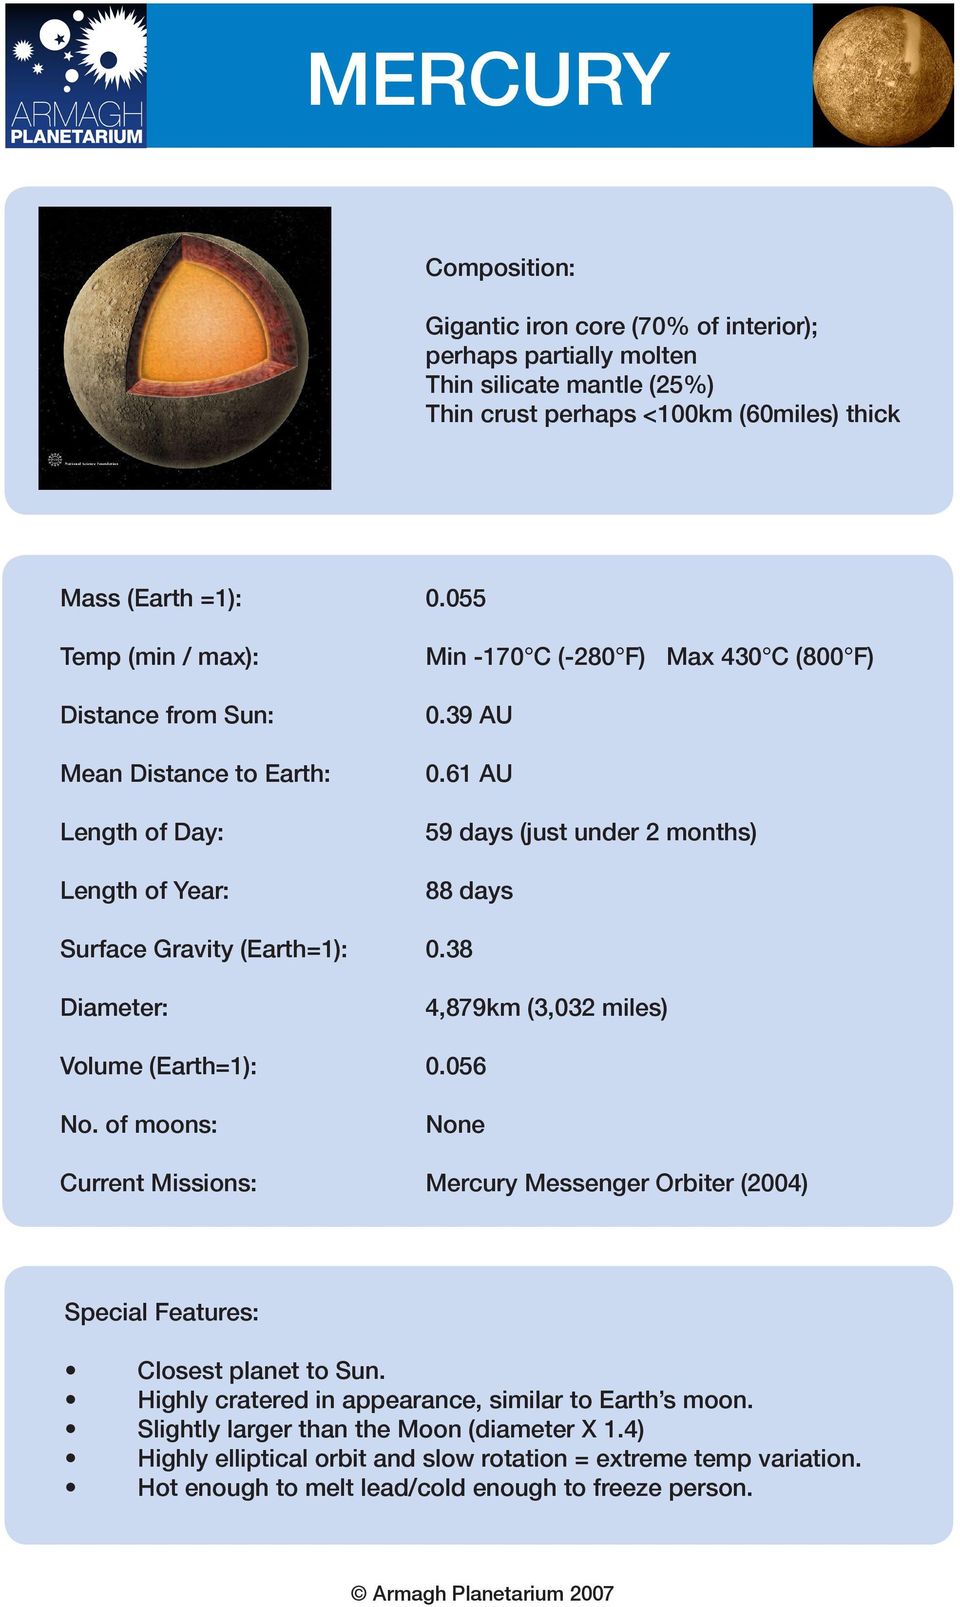 38 4,879km (3,032 miles) Volume (Earth=1): 0.056 None Current Missions: Mercury Messenger Orbiter (2004) Closest planet to Sun.